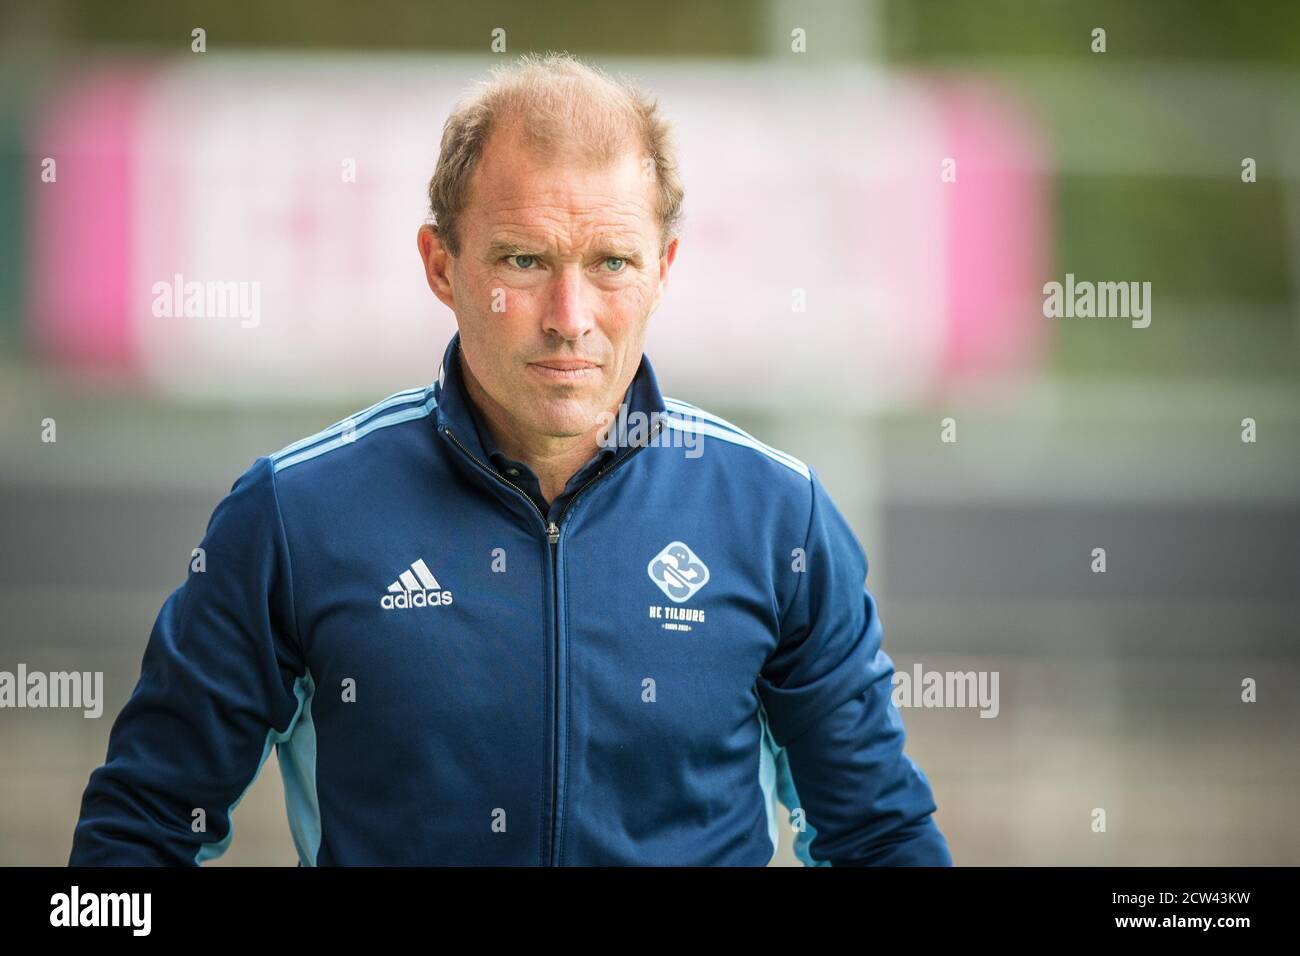 Coach jeroen delmee hi-res stock photography and images - Alamy